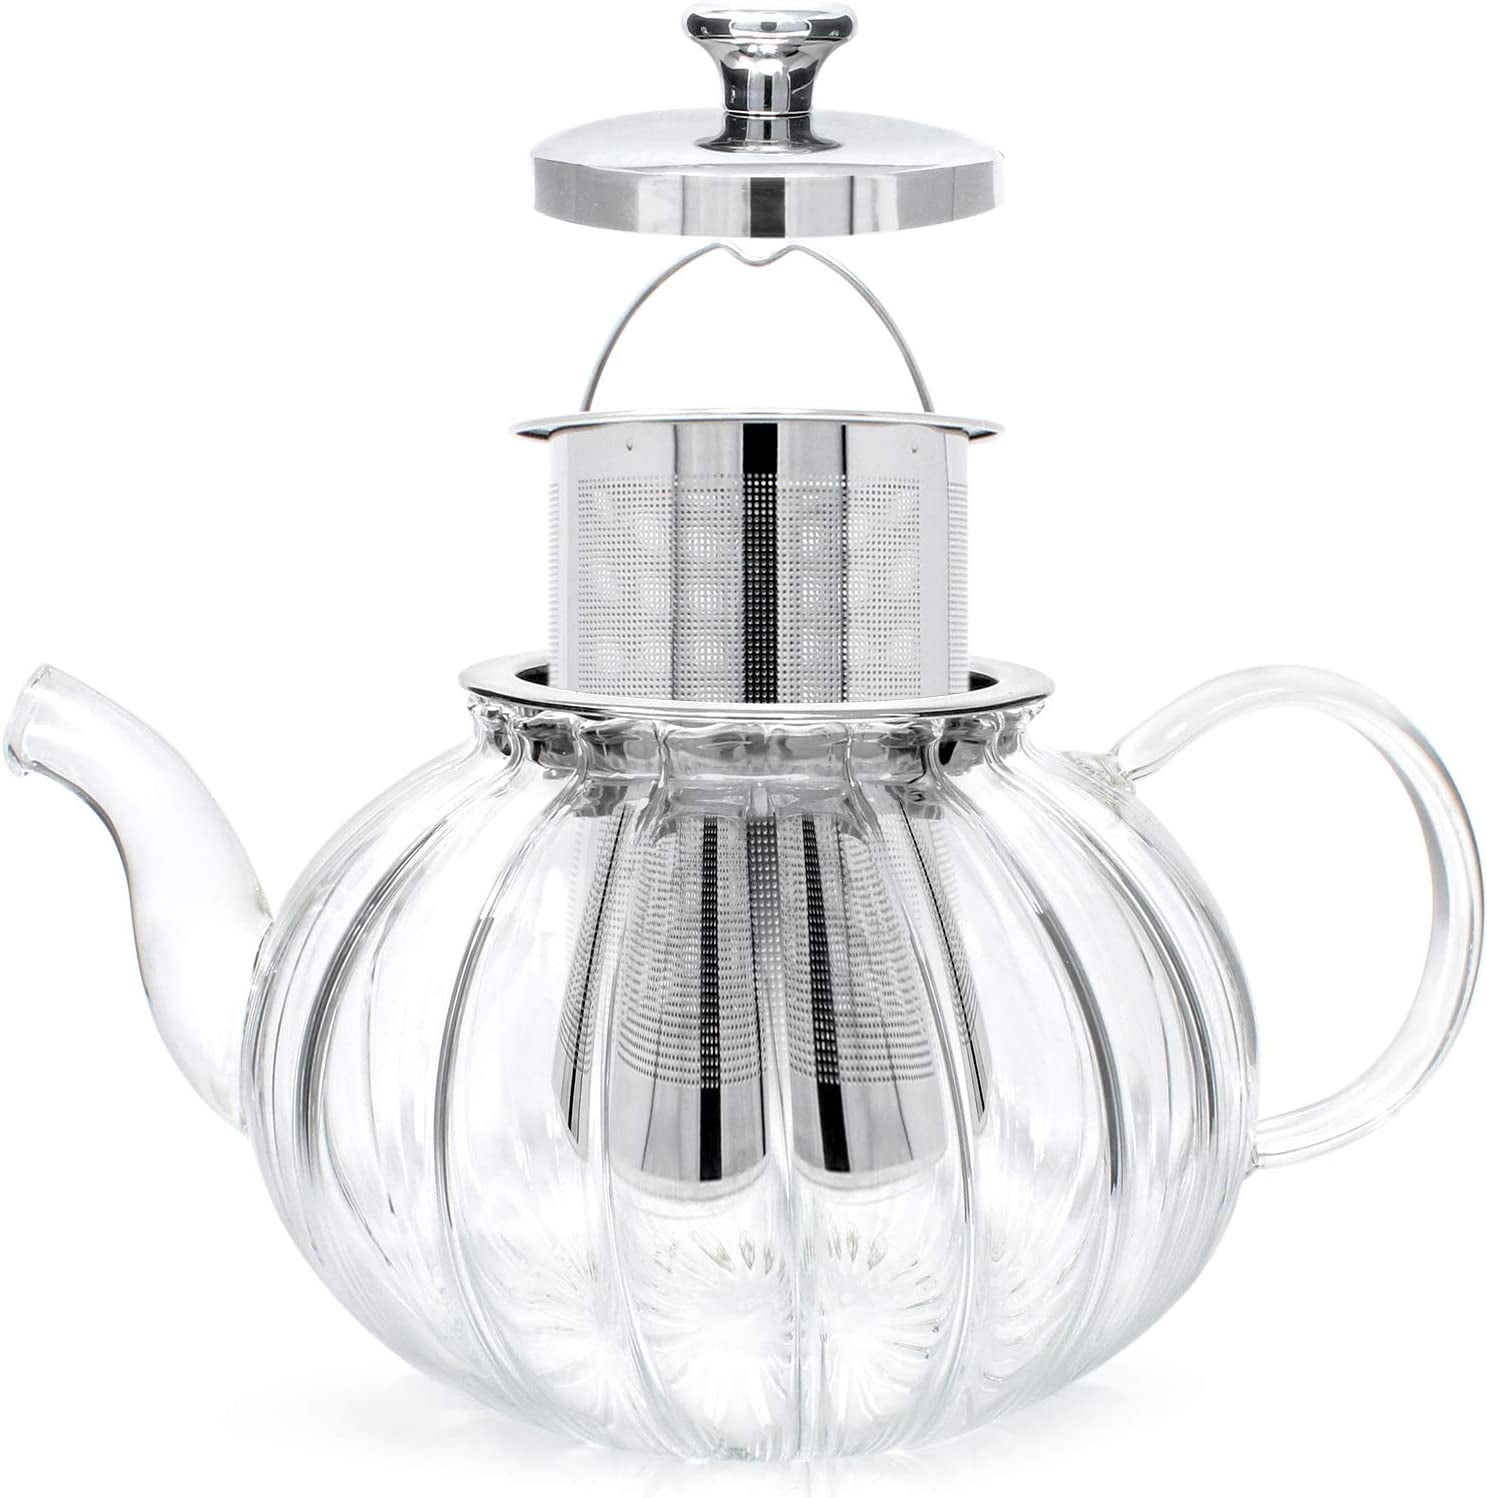 Aserson 1100 ml/37 oz Glass Teapot, Heat Resistant, Stainless